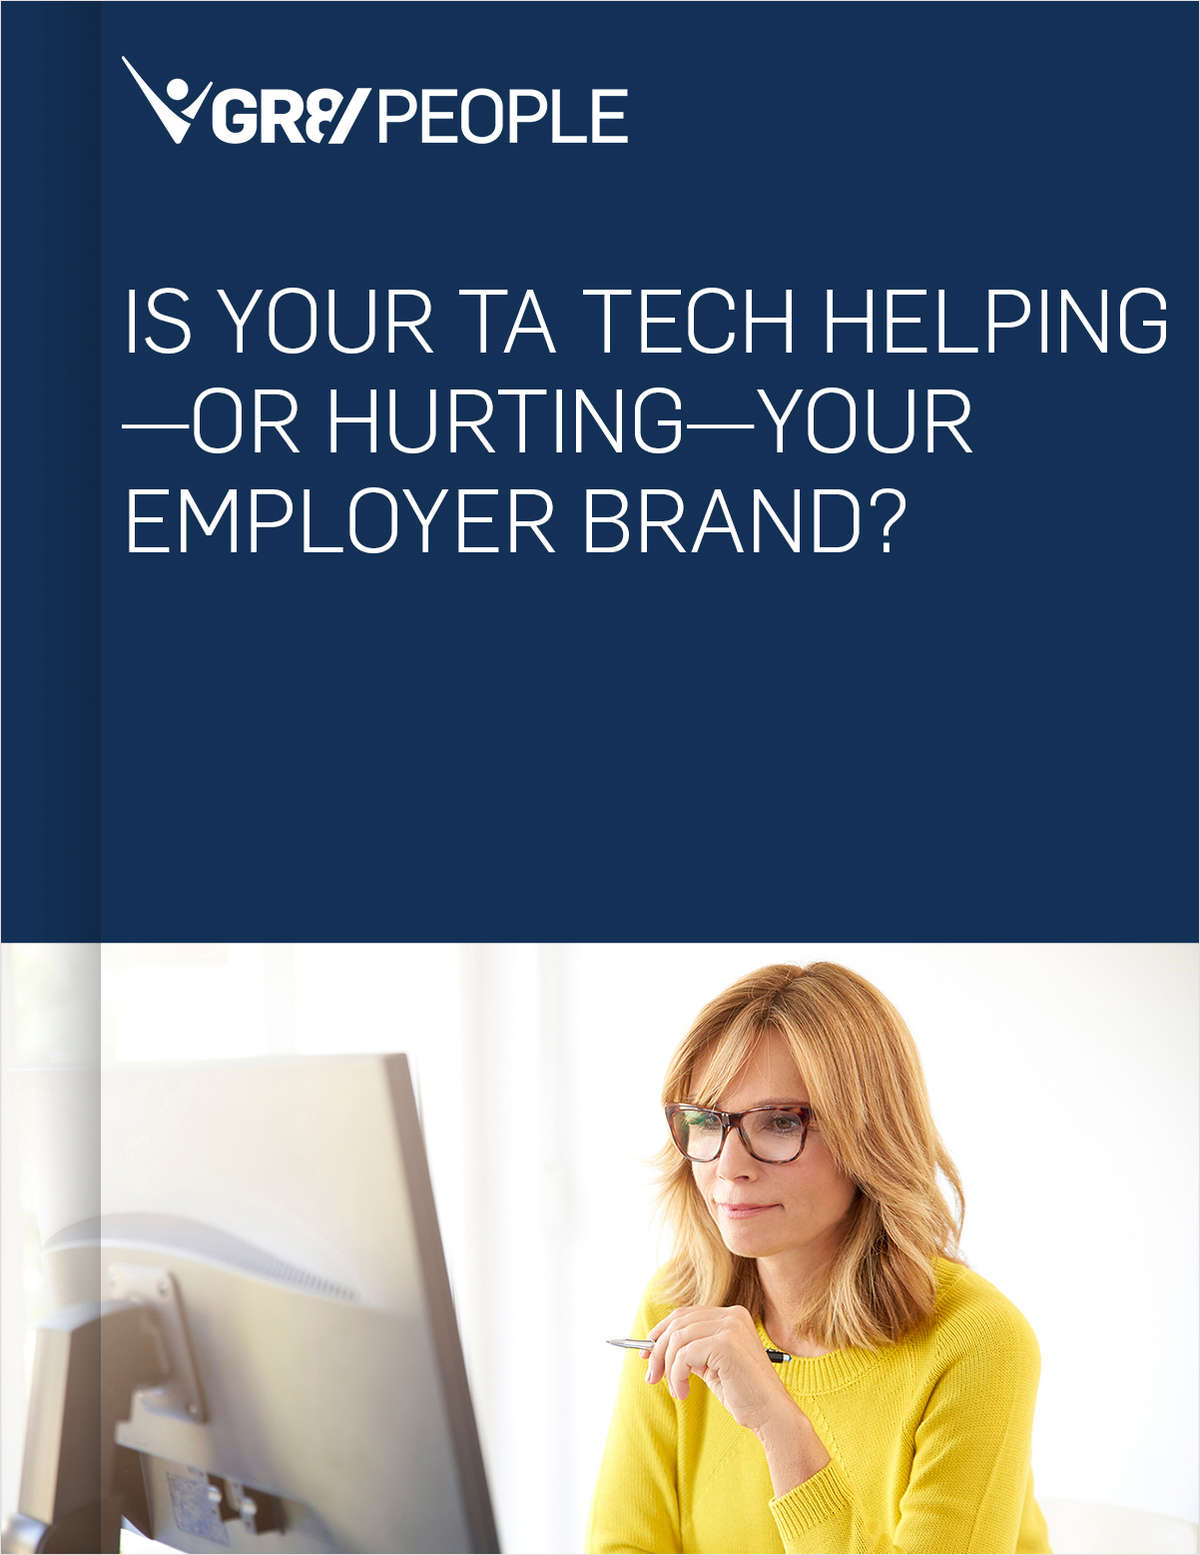 Is Your TA Tech Helping--Or Hurting--Your Employer Brand?